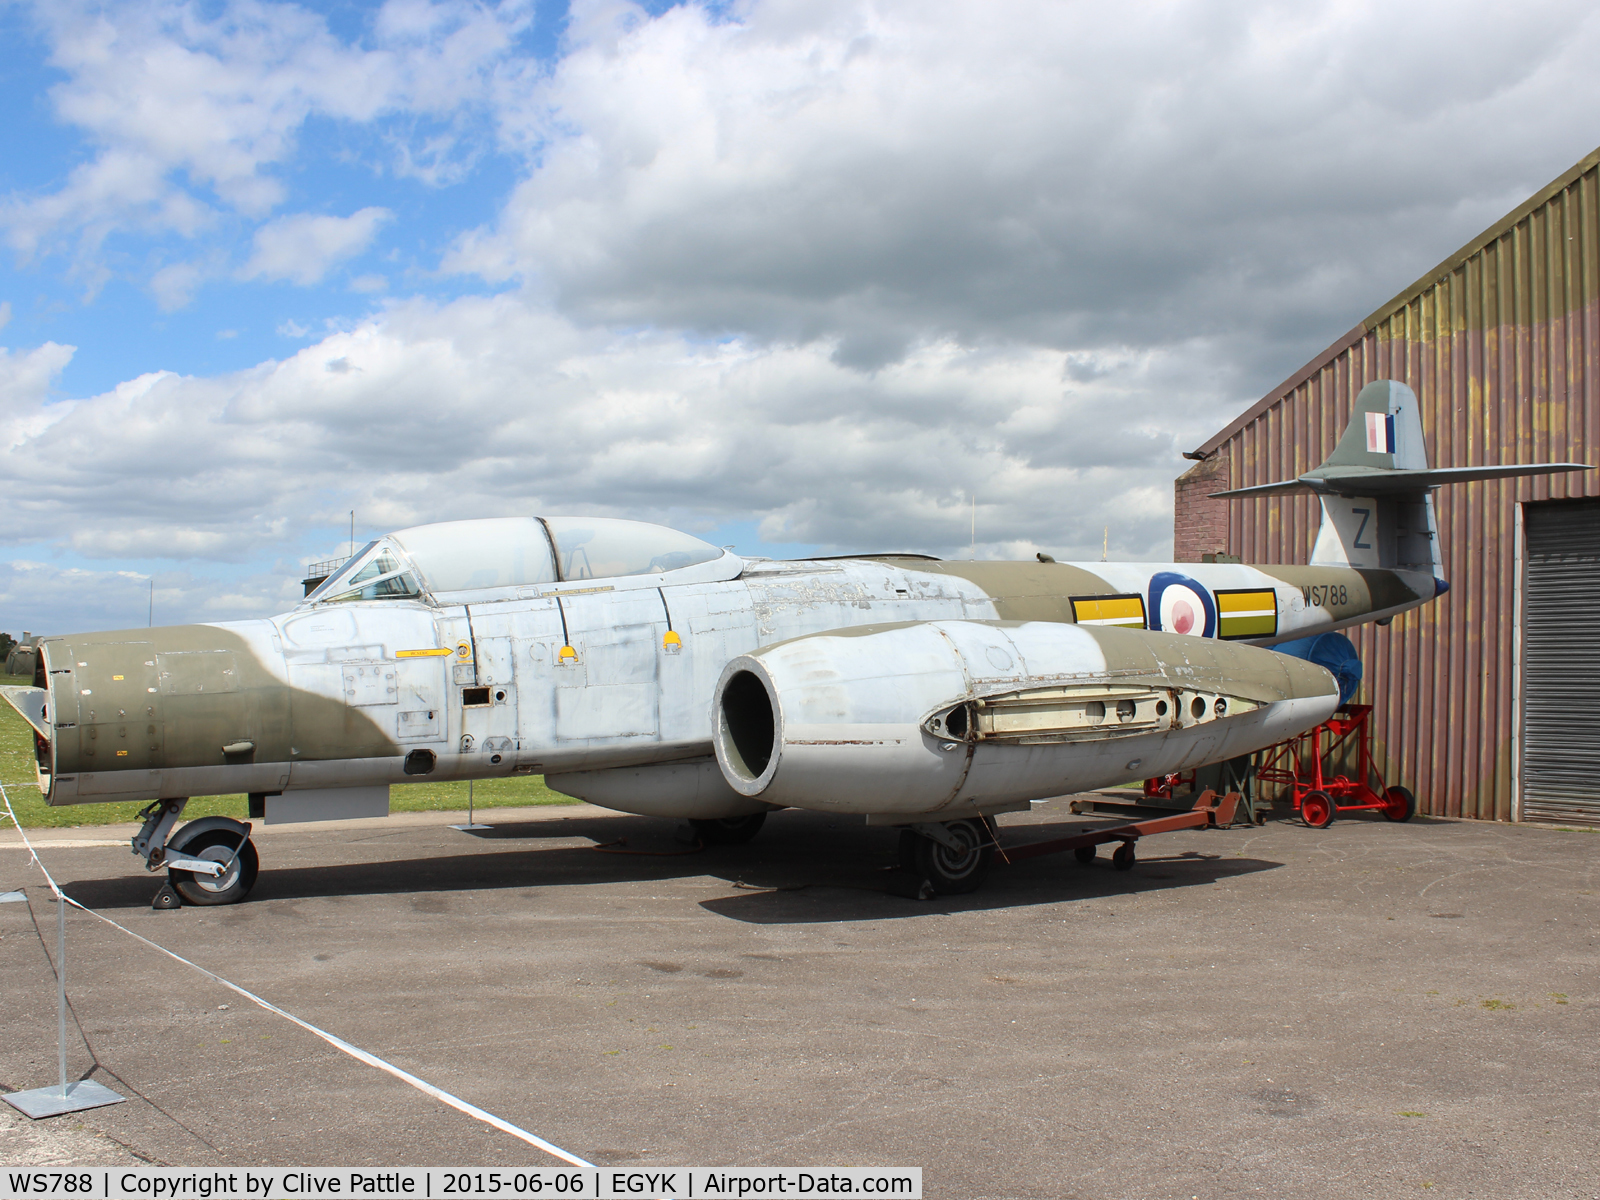 WS788, 1954 Gloster Meteor NF(T).14 C/N Not found WS788, On display at the Yorkshire Aviation Museum, Elvington, EGYK, awaiting restoration.